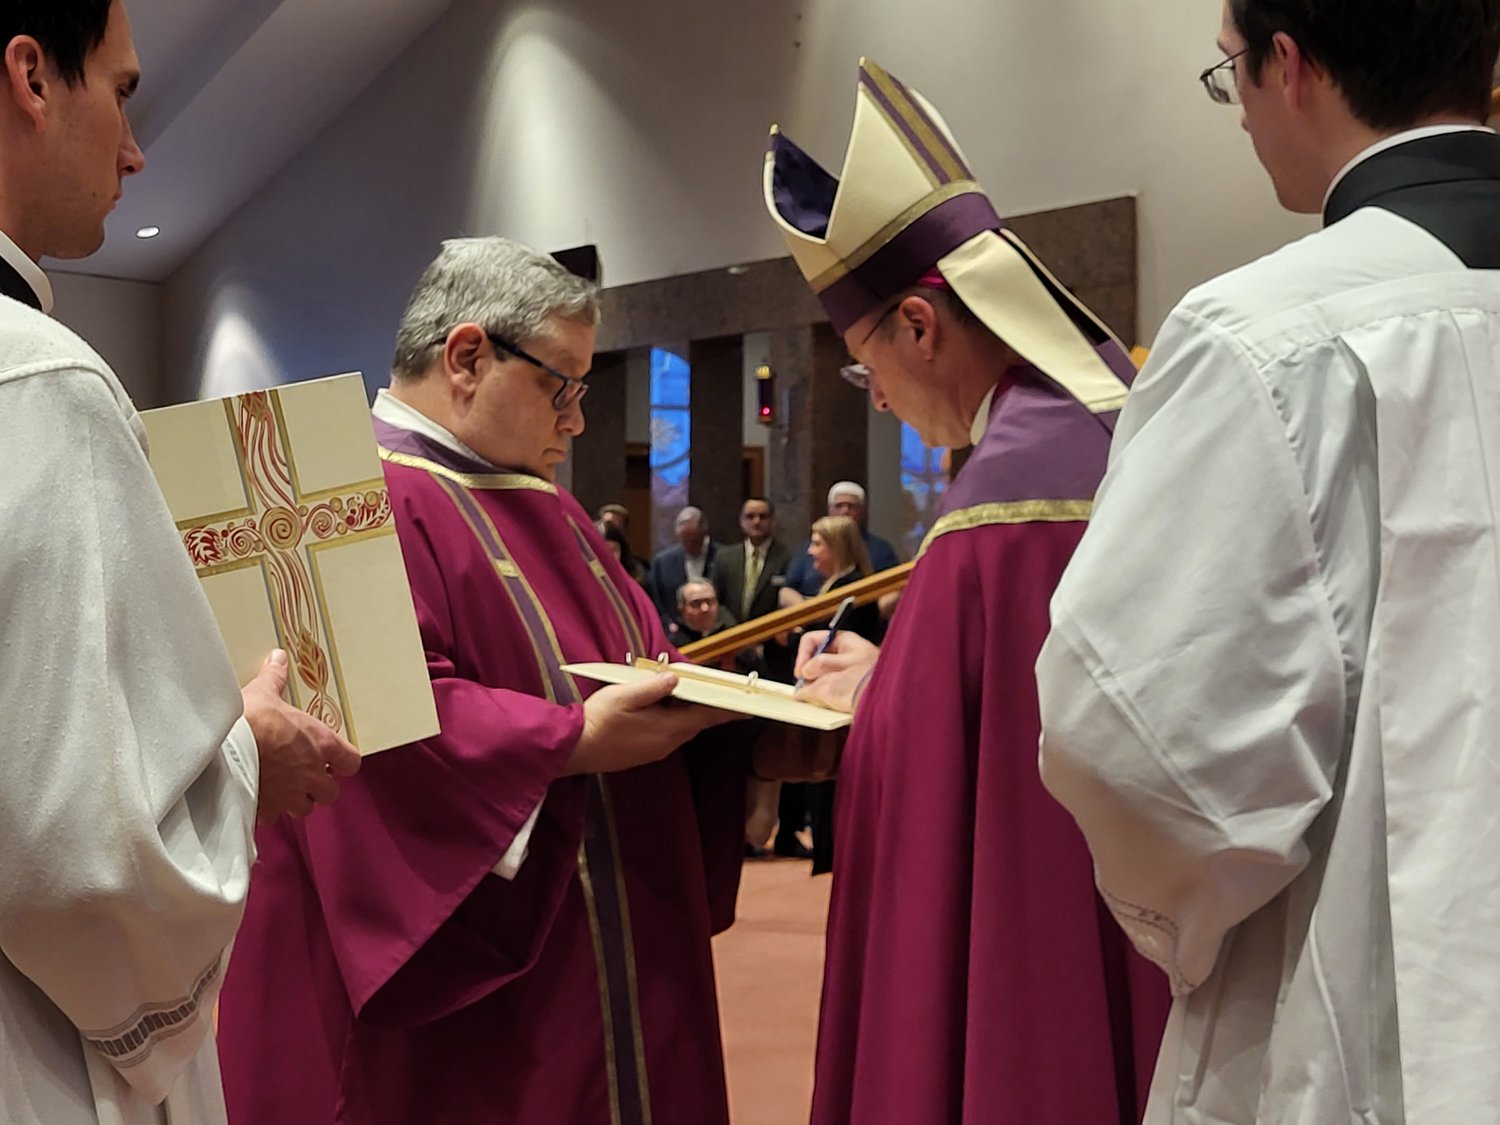 Bishop W. Shawn McKnight signs the Book of the Elect, containing the signatures of people throughout the diocese who are seeking initiation through Baptism and Confirmation at Easter.